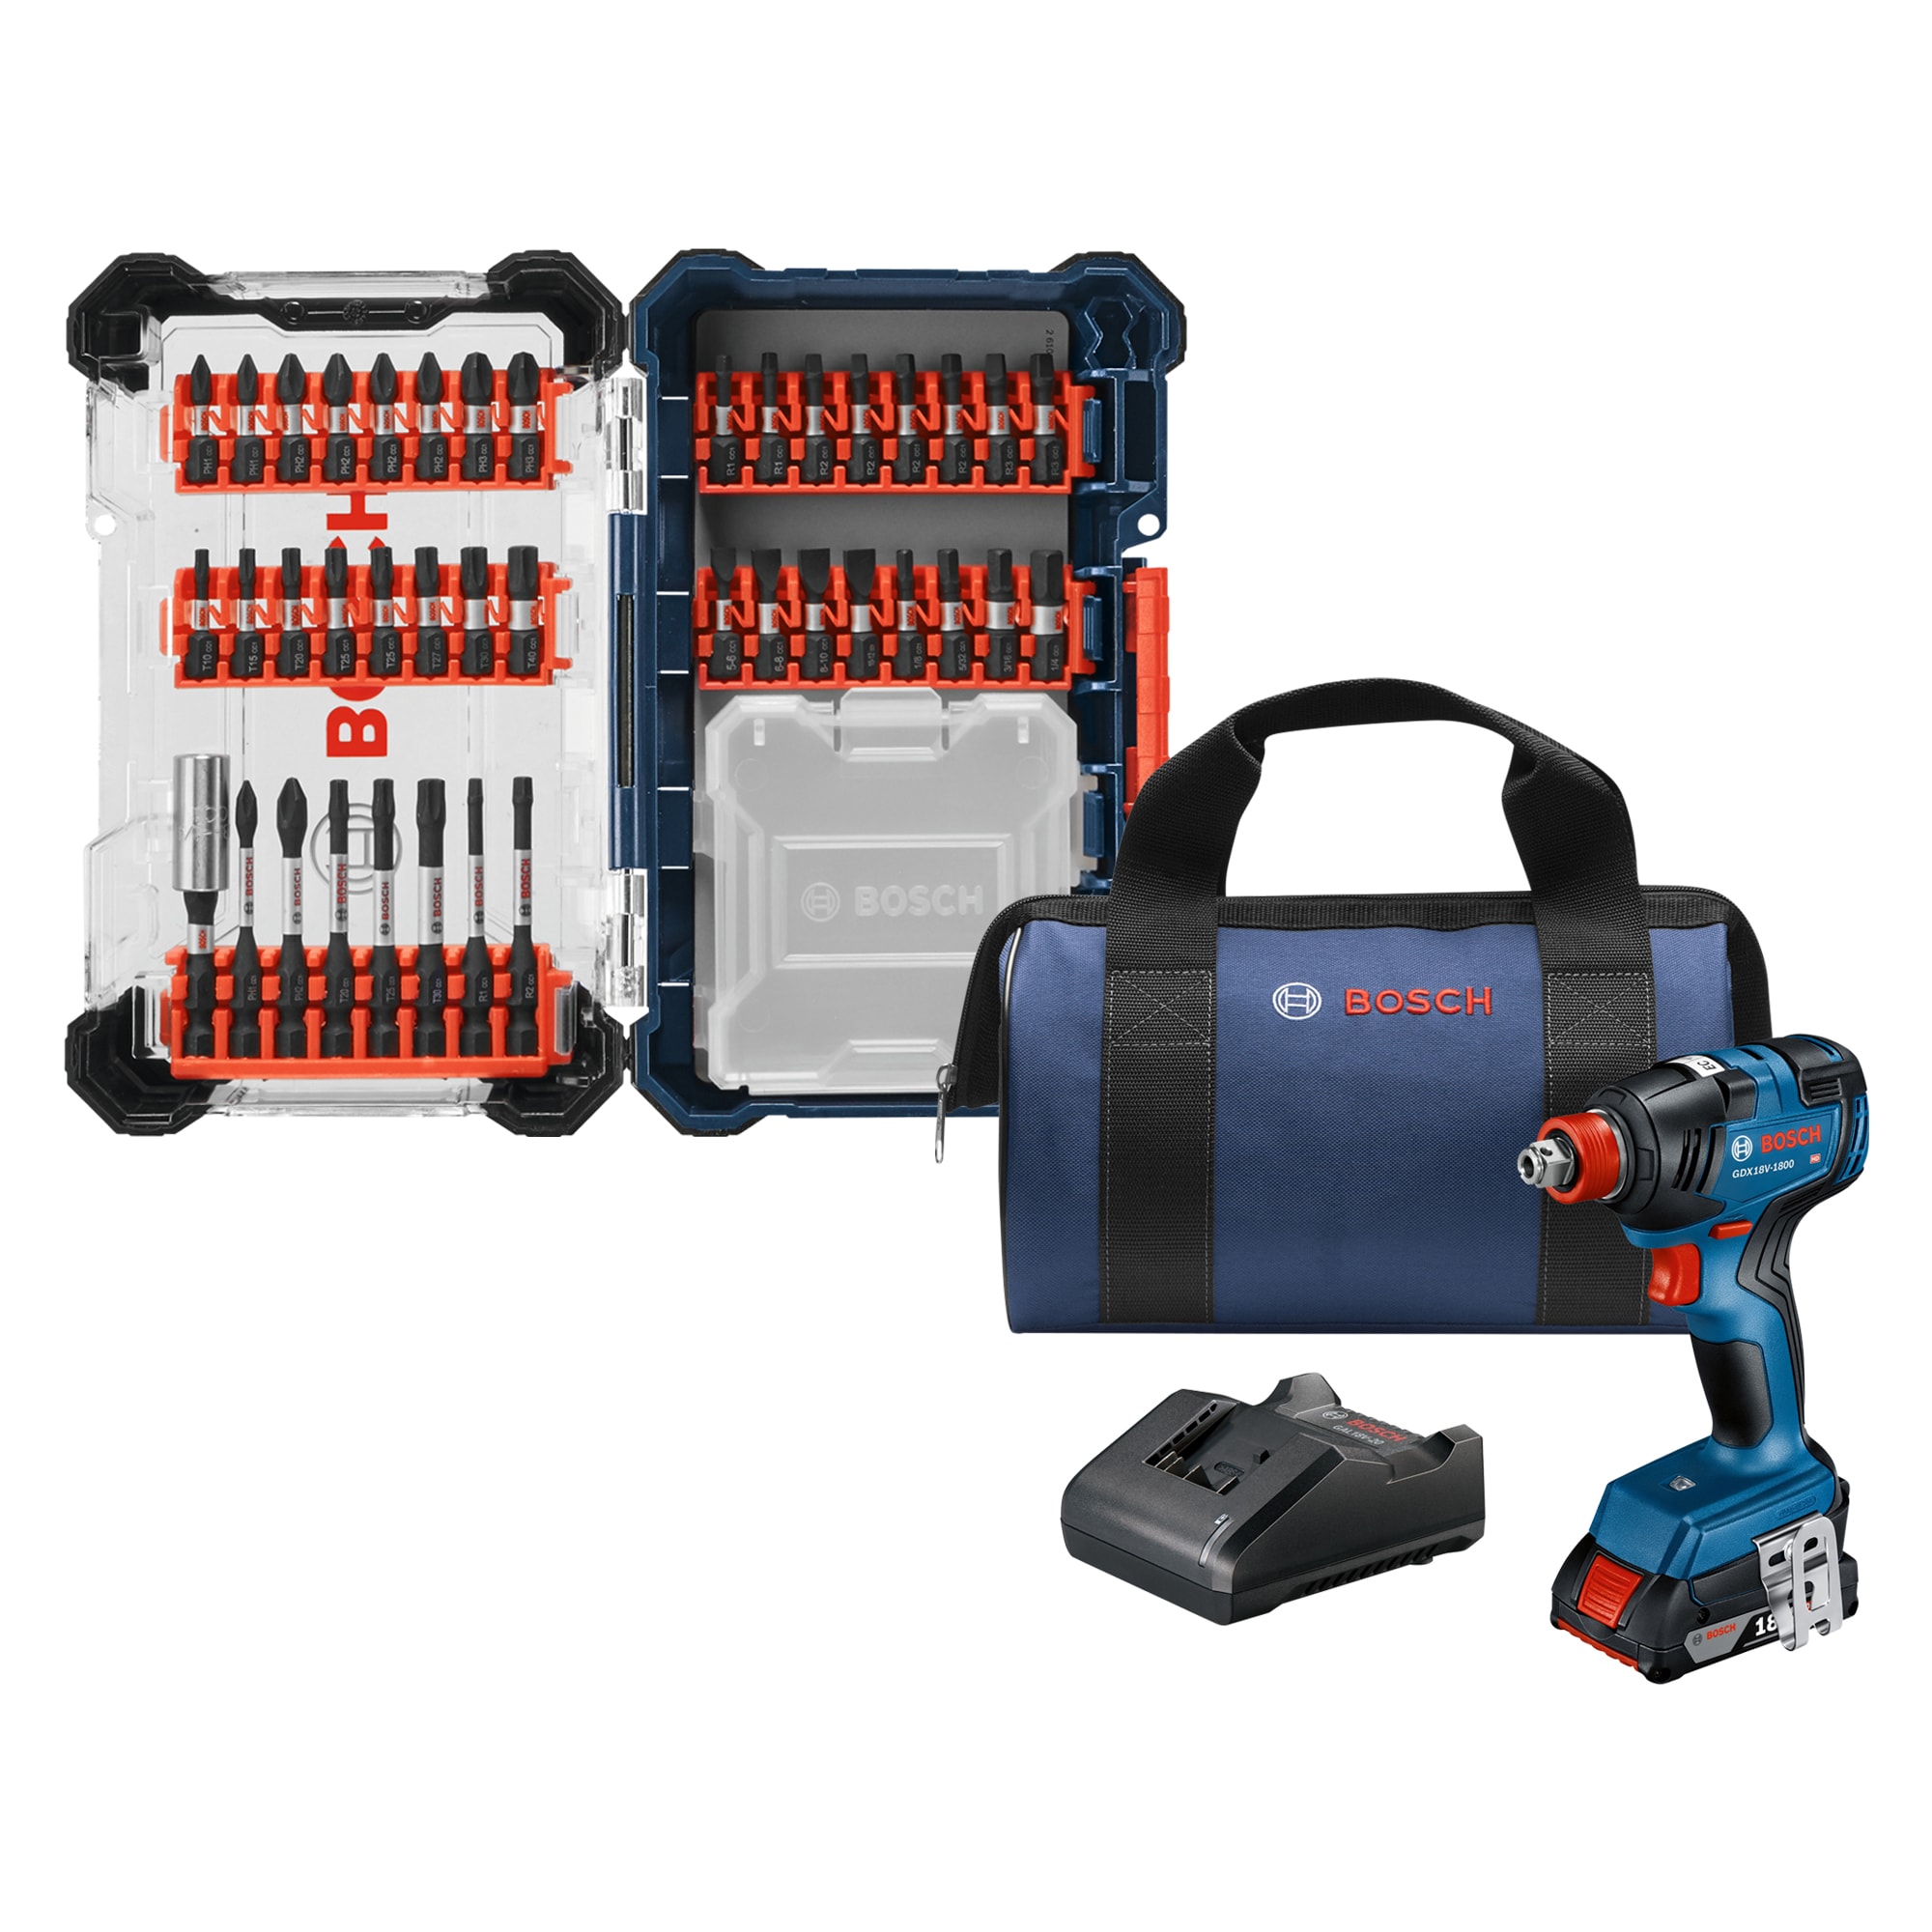 Bosch 18V 2-in-1 Cordless Impact Driver with 40-piece Bit Set